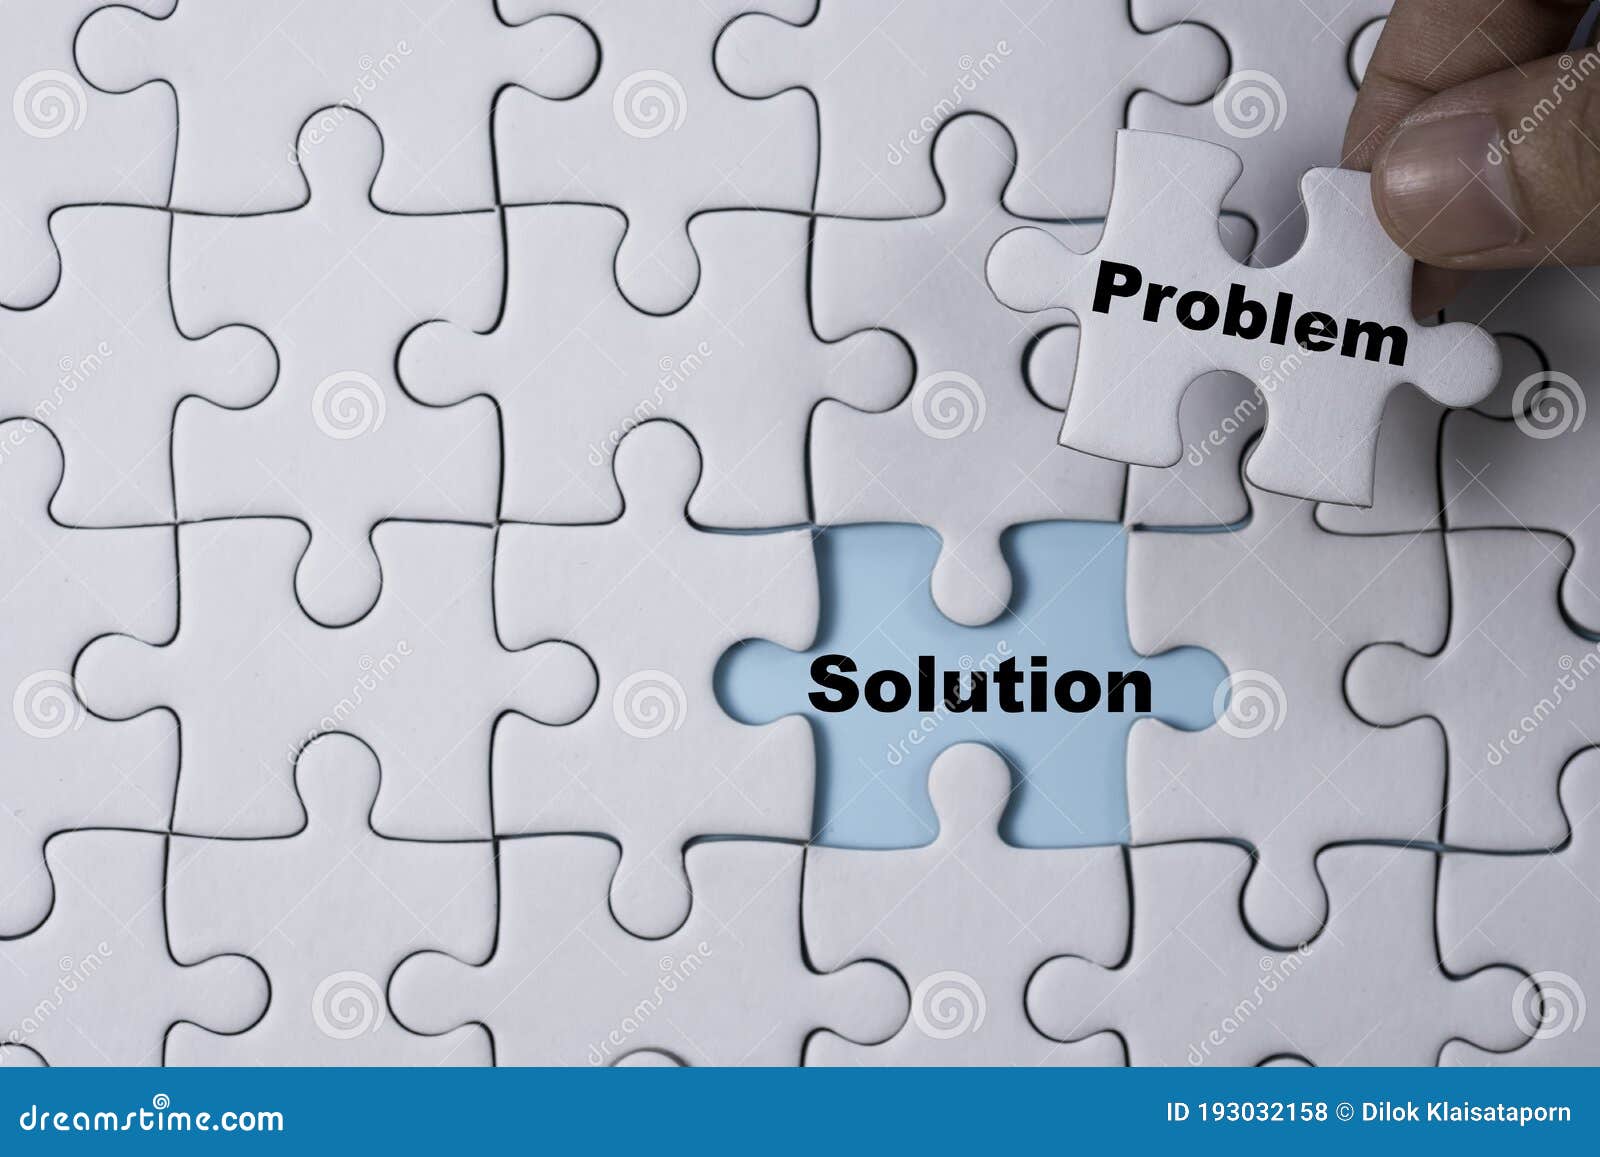 problem and solution puzzle piece